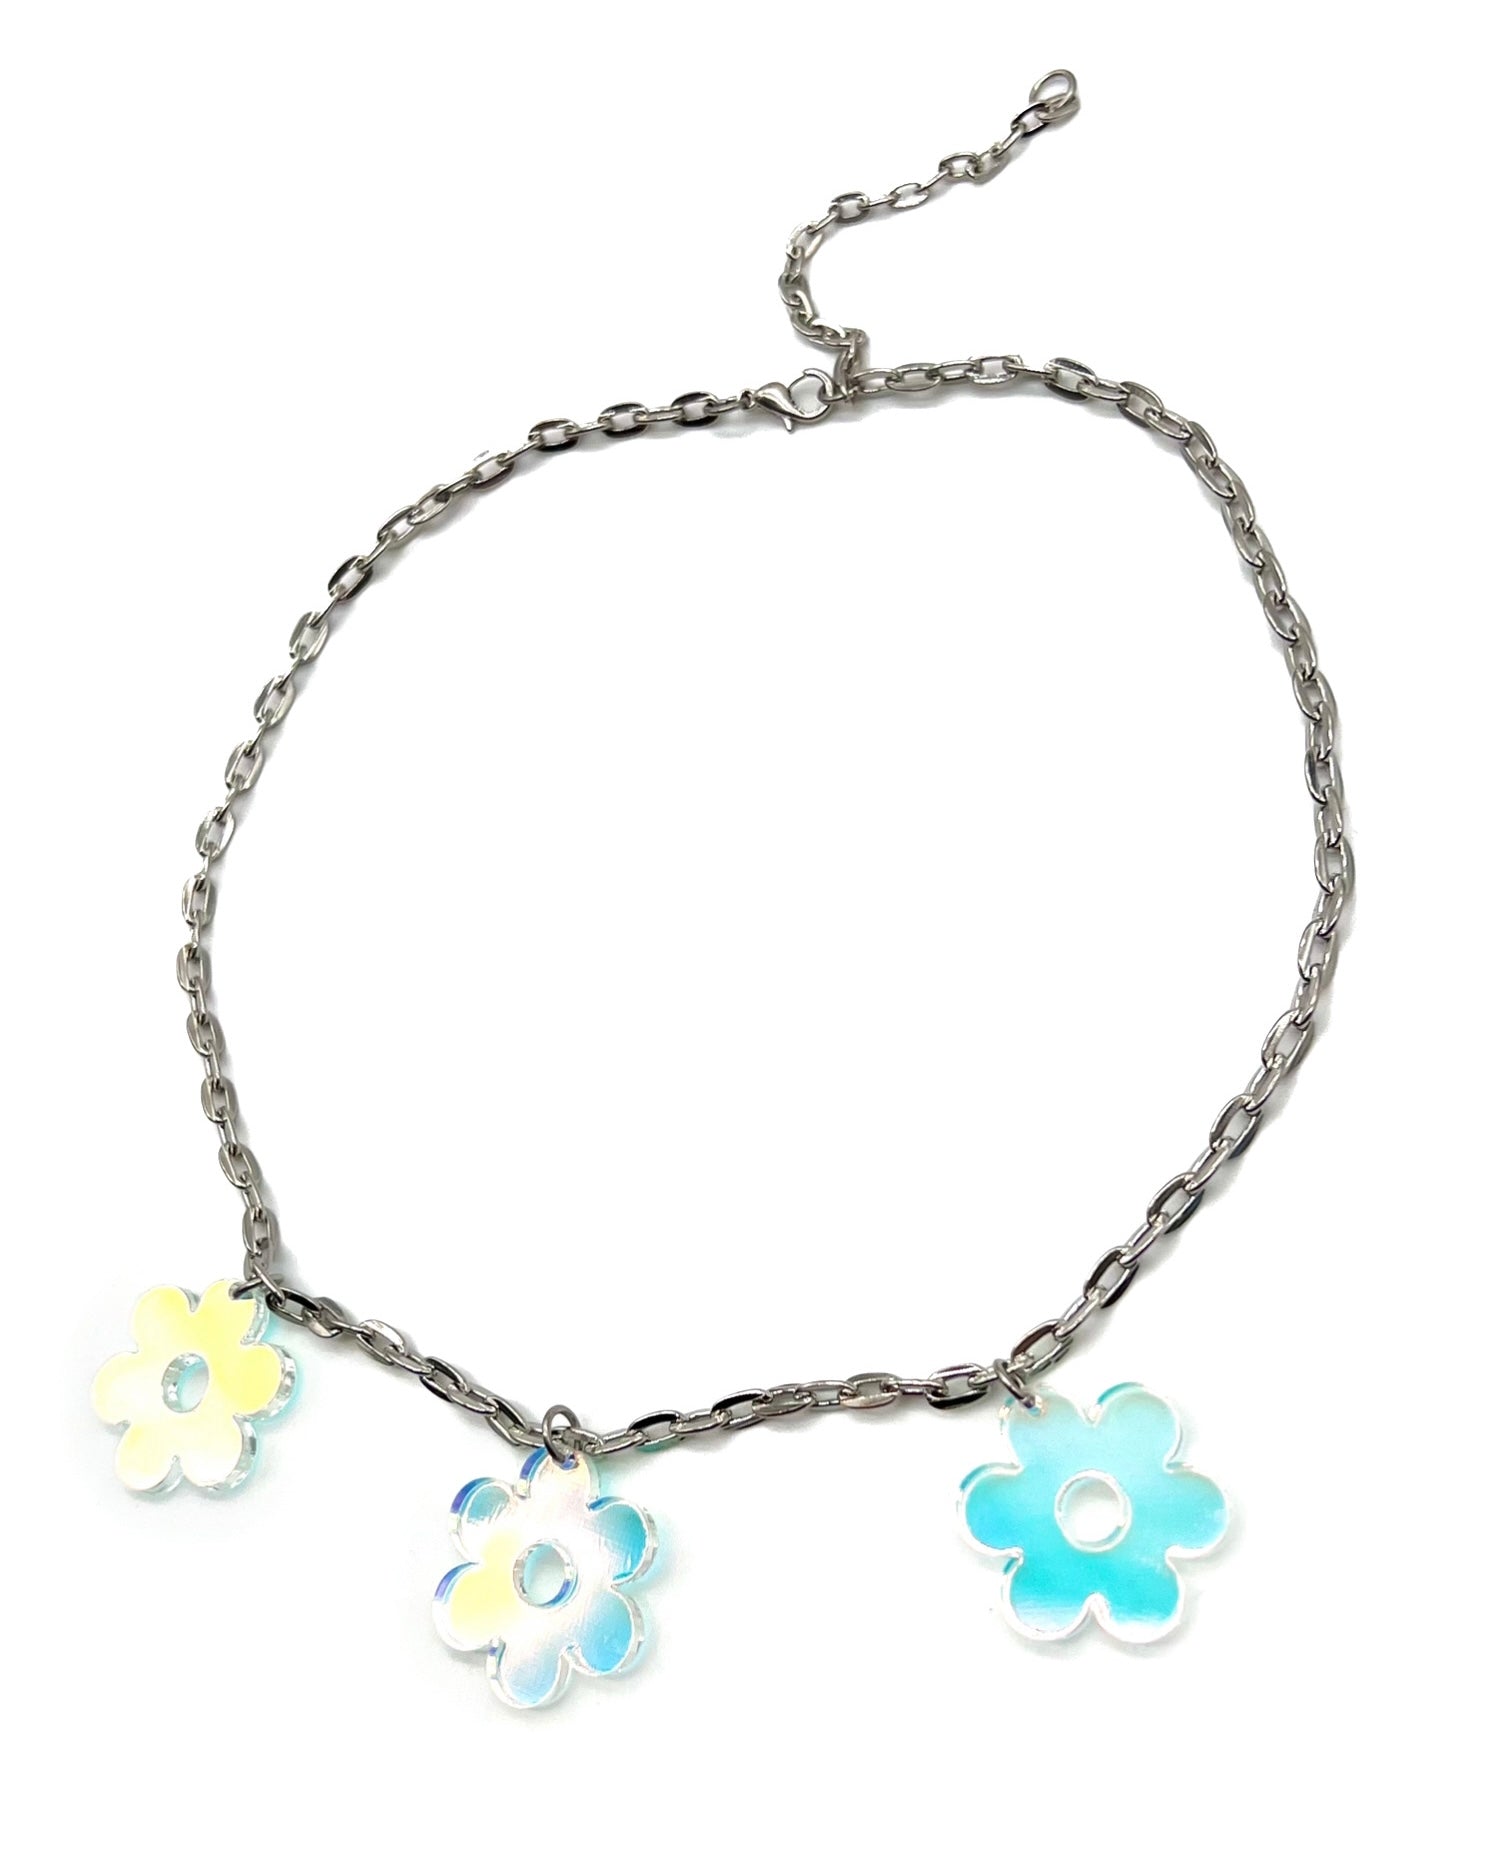 The Flower Power Iridescent Choker on a white background.